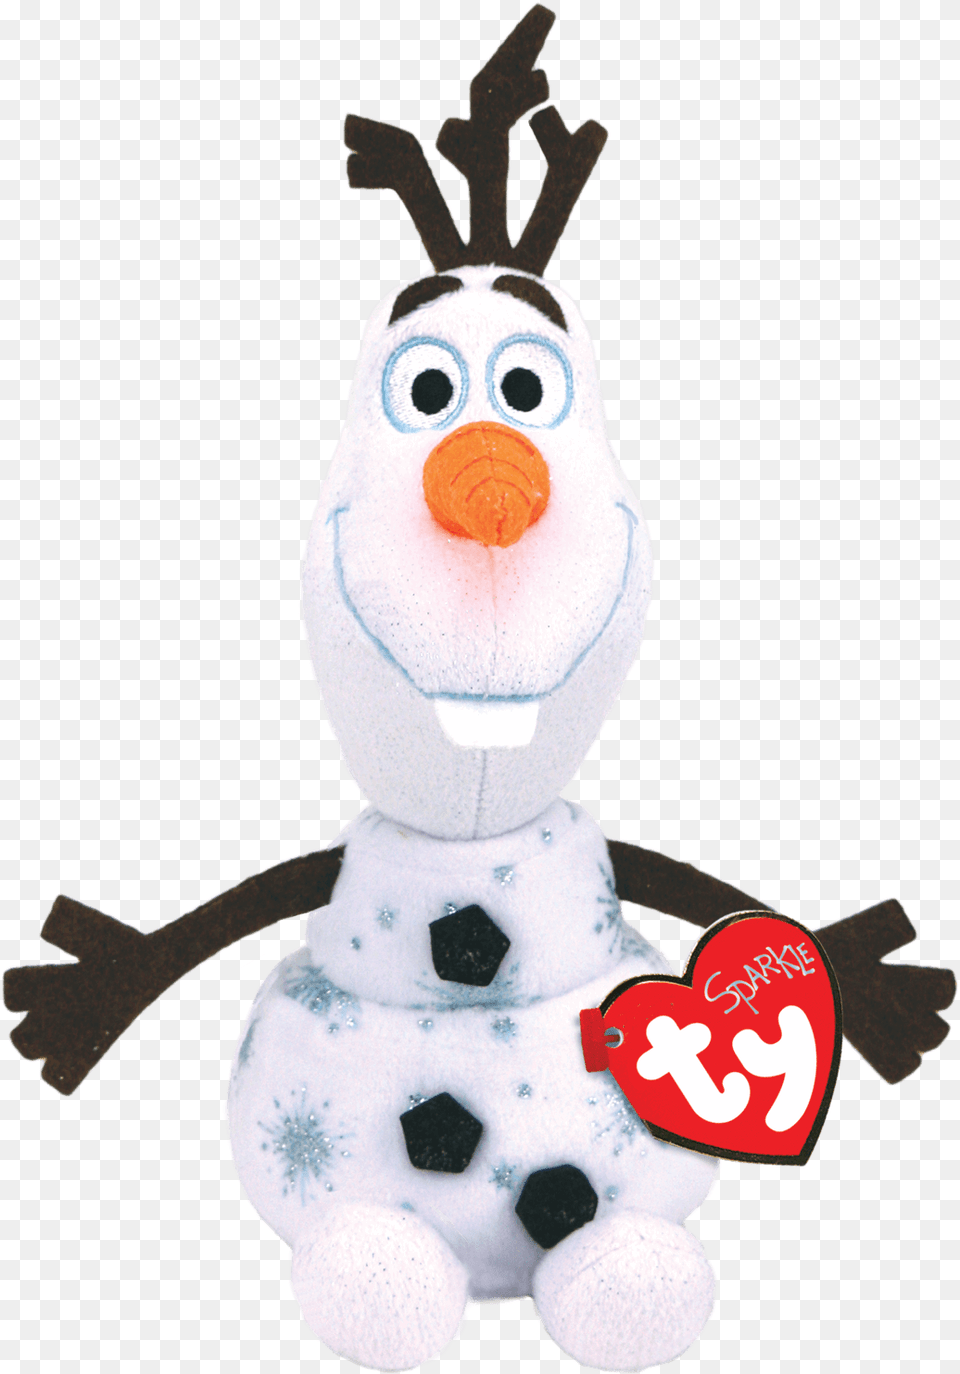 Ty Frozen Olaf Frozen 2 Snowman With Sound Reg Frozen 2 Ty Plush, Nature, Outdoors, Winter, Snow Png